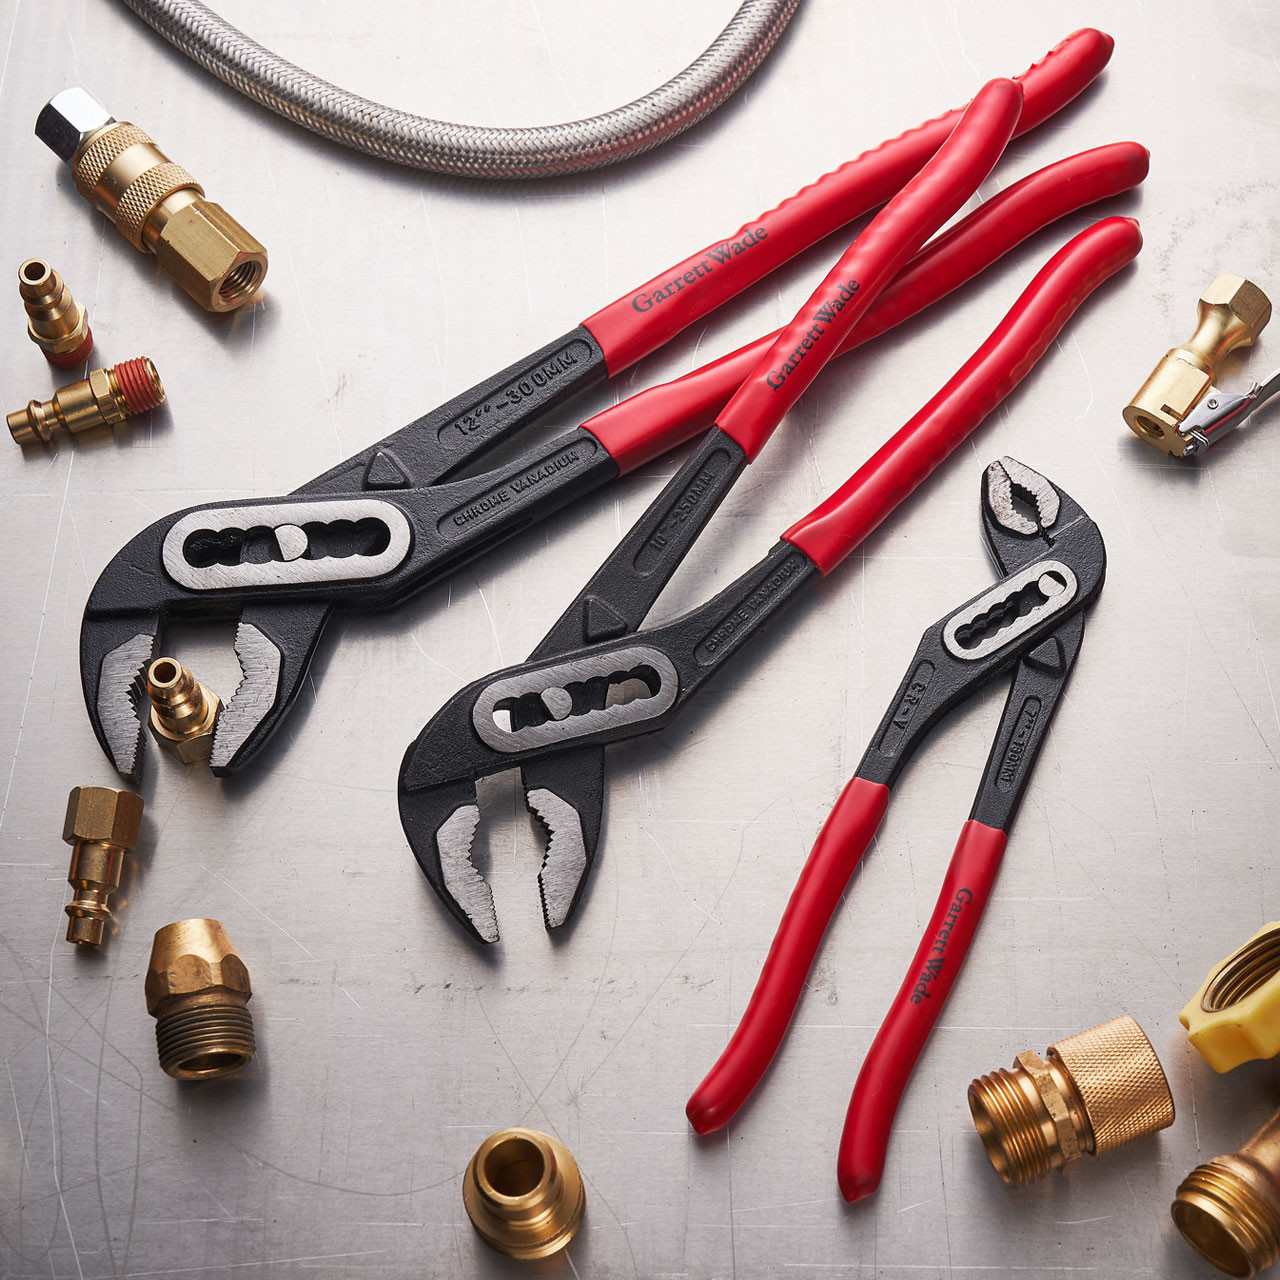 THREE PLIERS WRENCHES